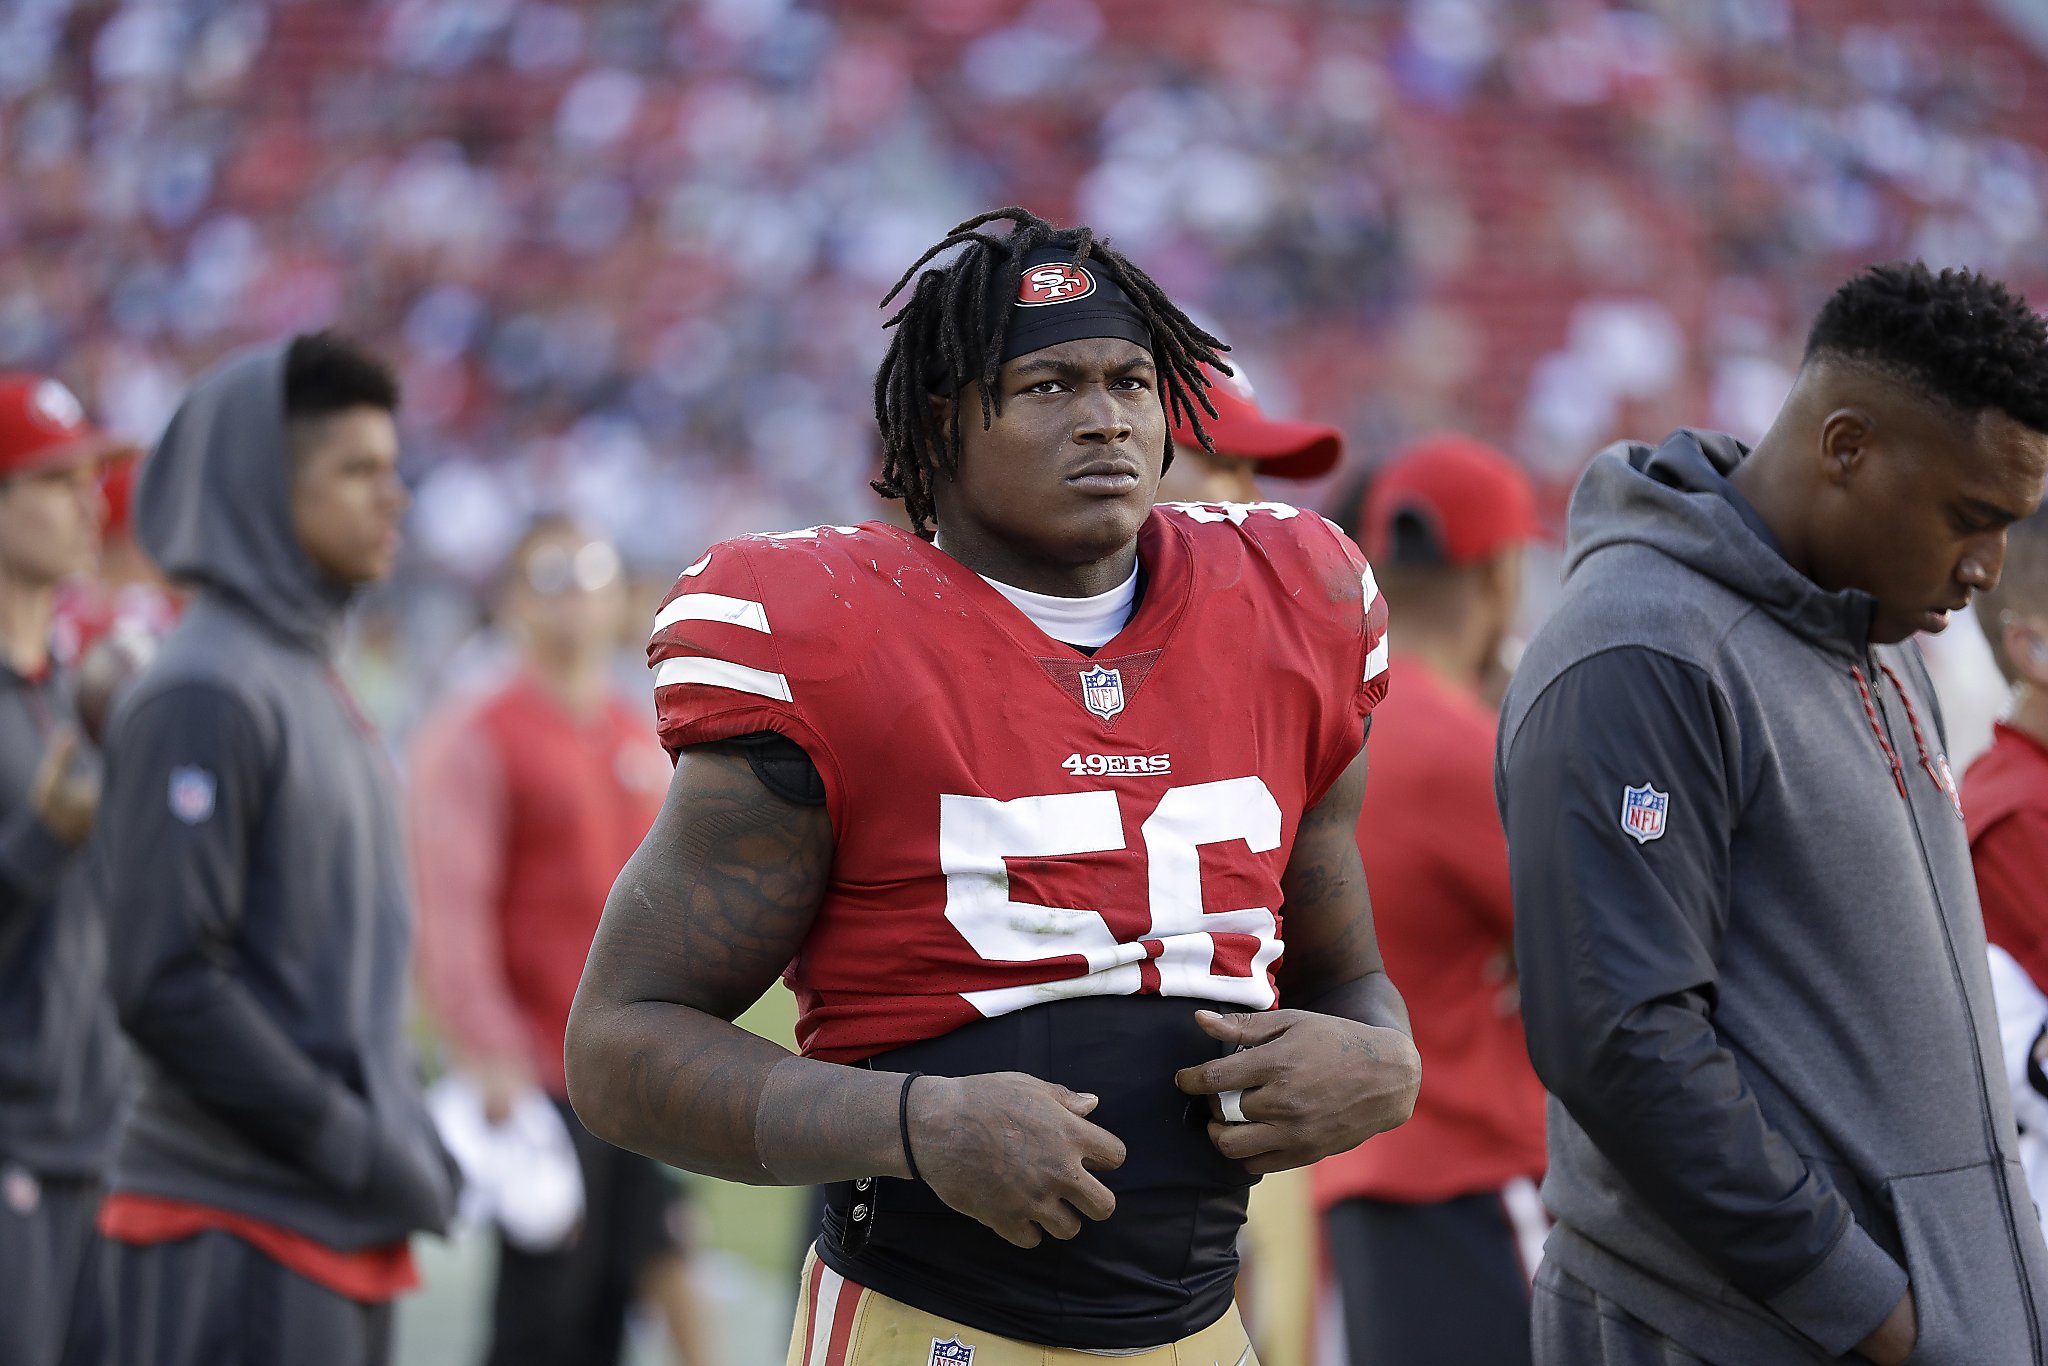 49ers linebacker Reuben Foster charged with felony domestic violence